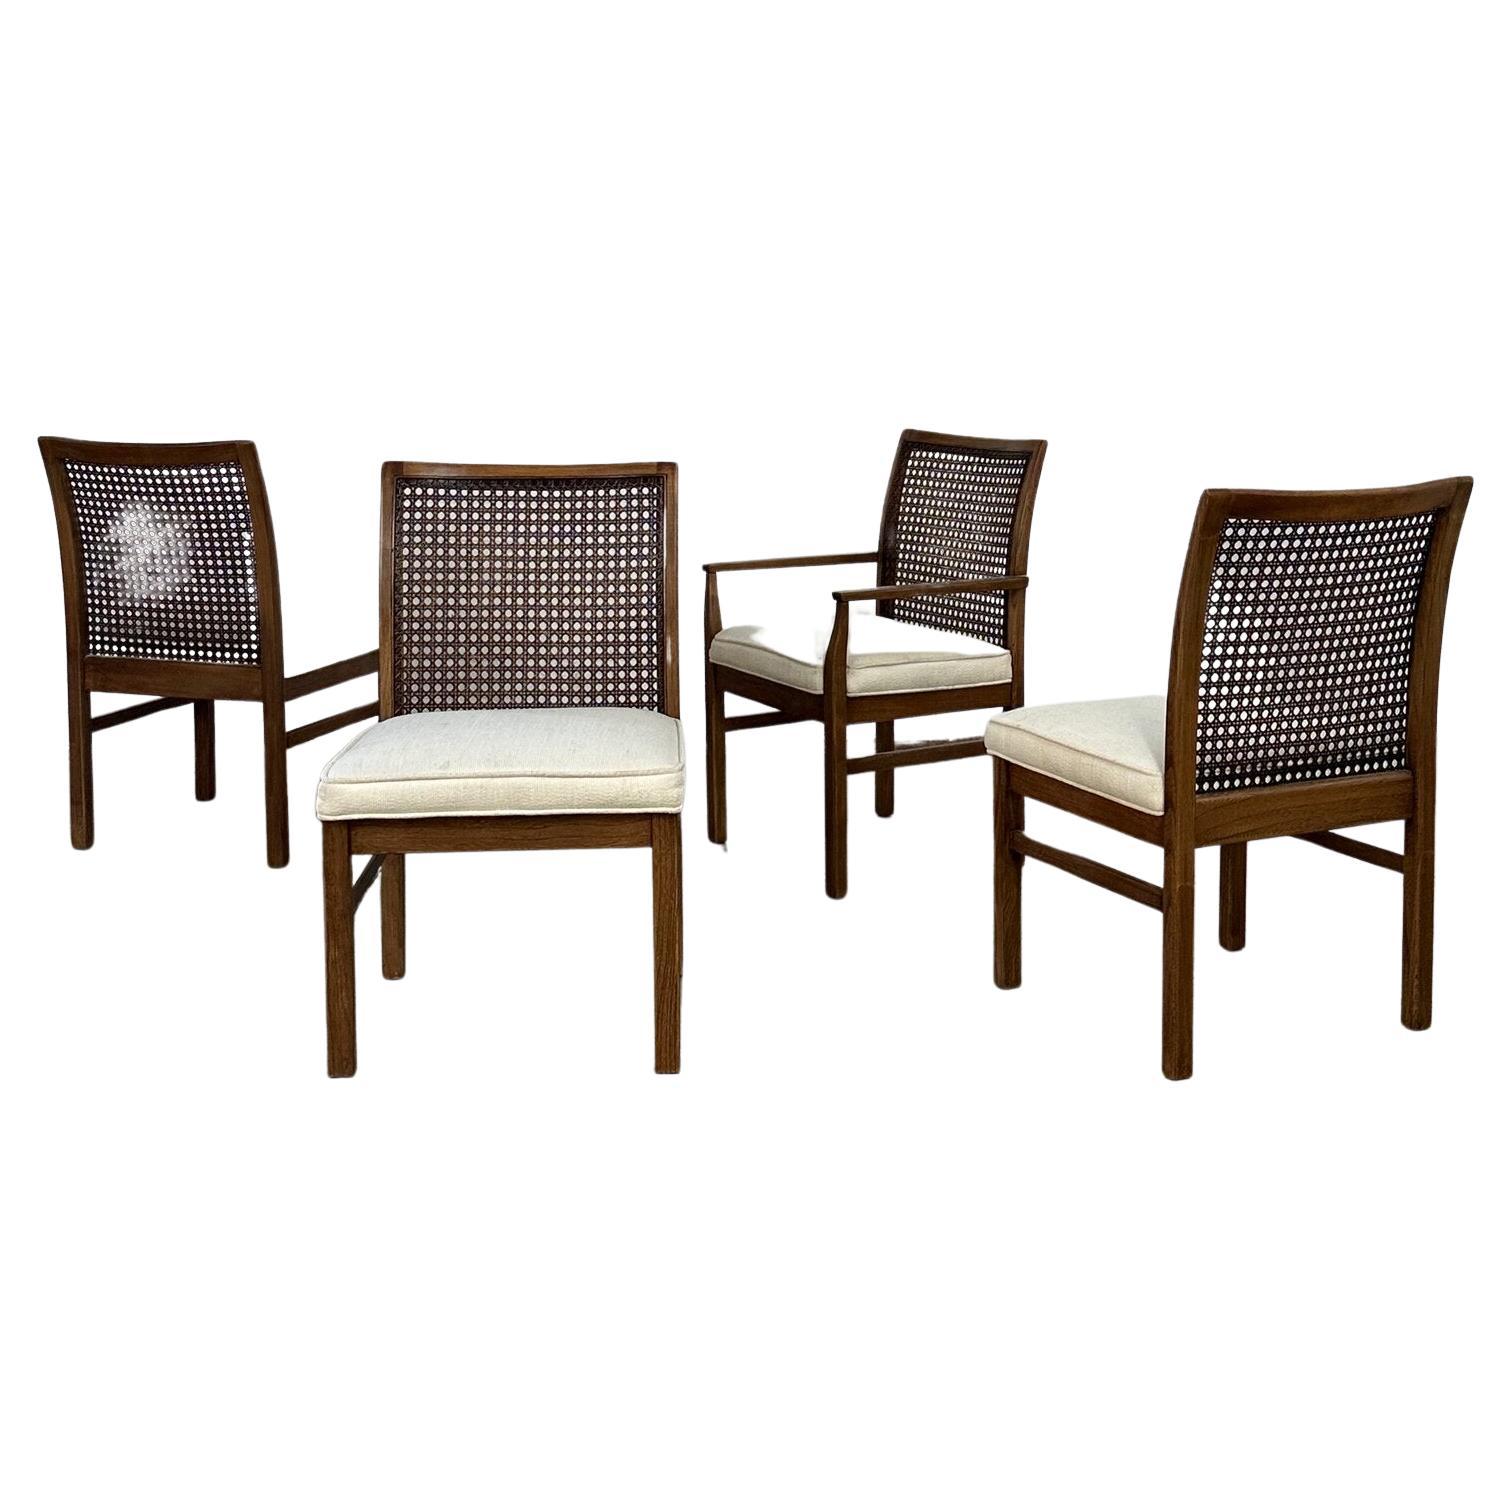 Mid century dining chairs by Lane -set of four